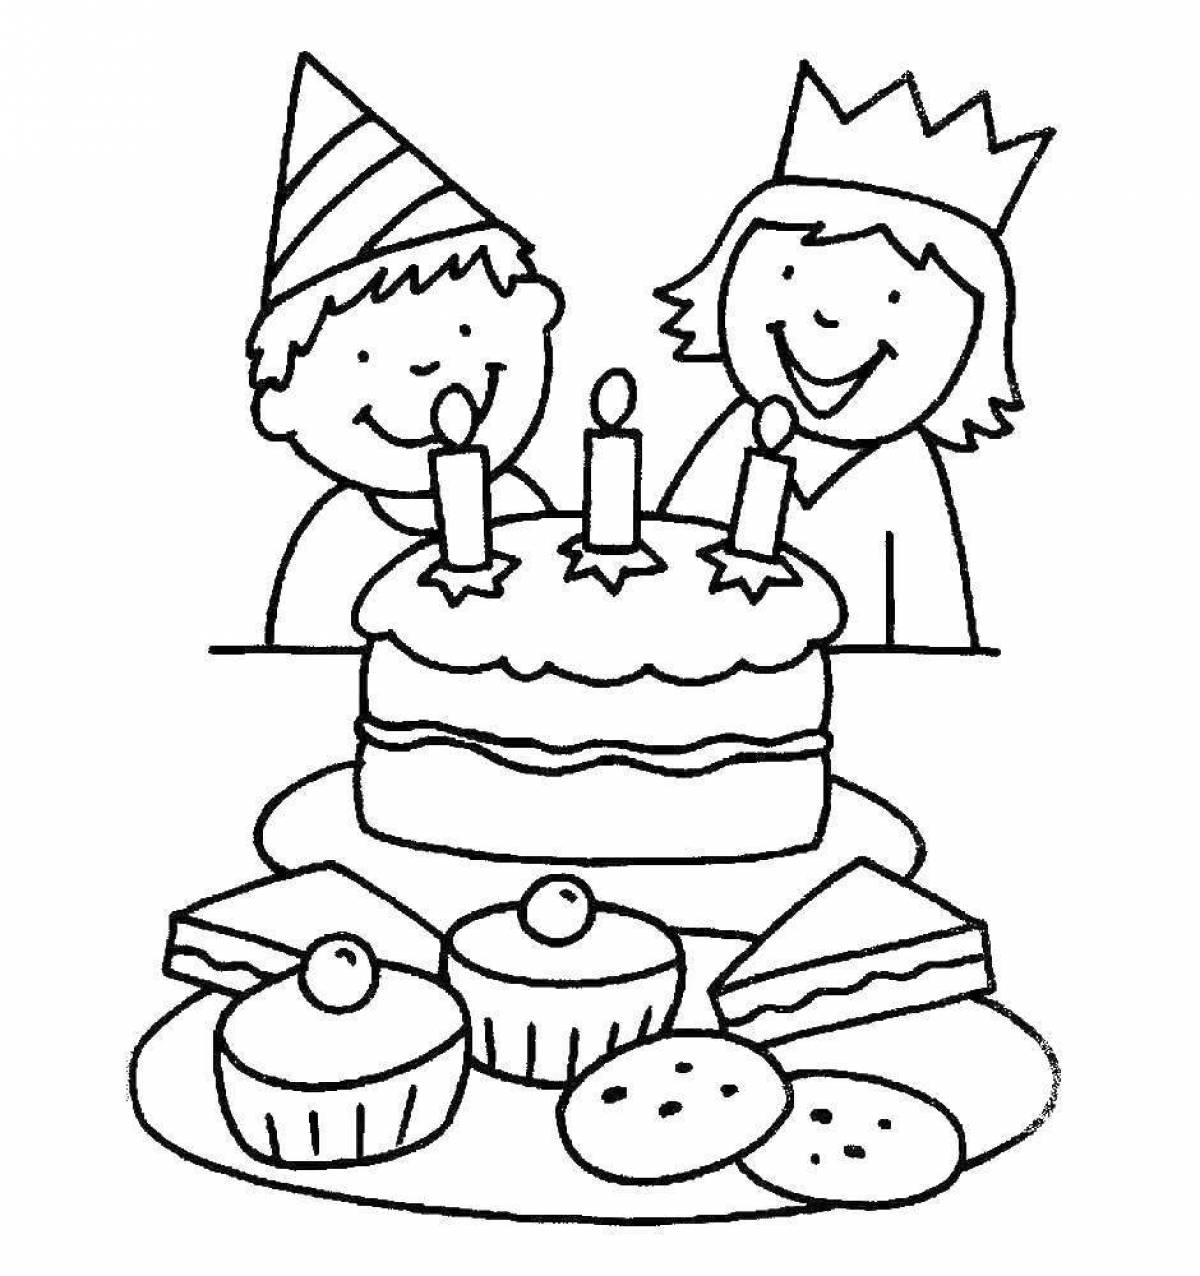 Exciting cake coloring pages for kids